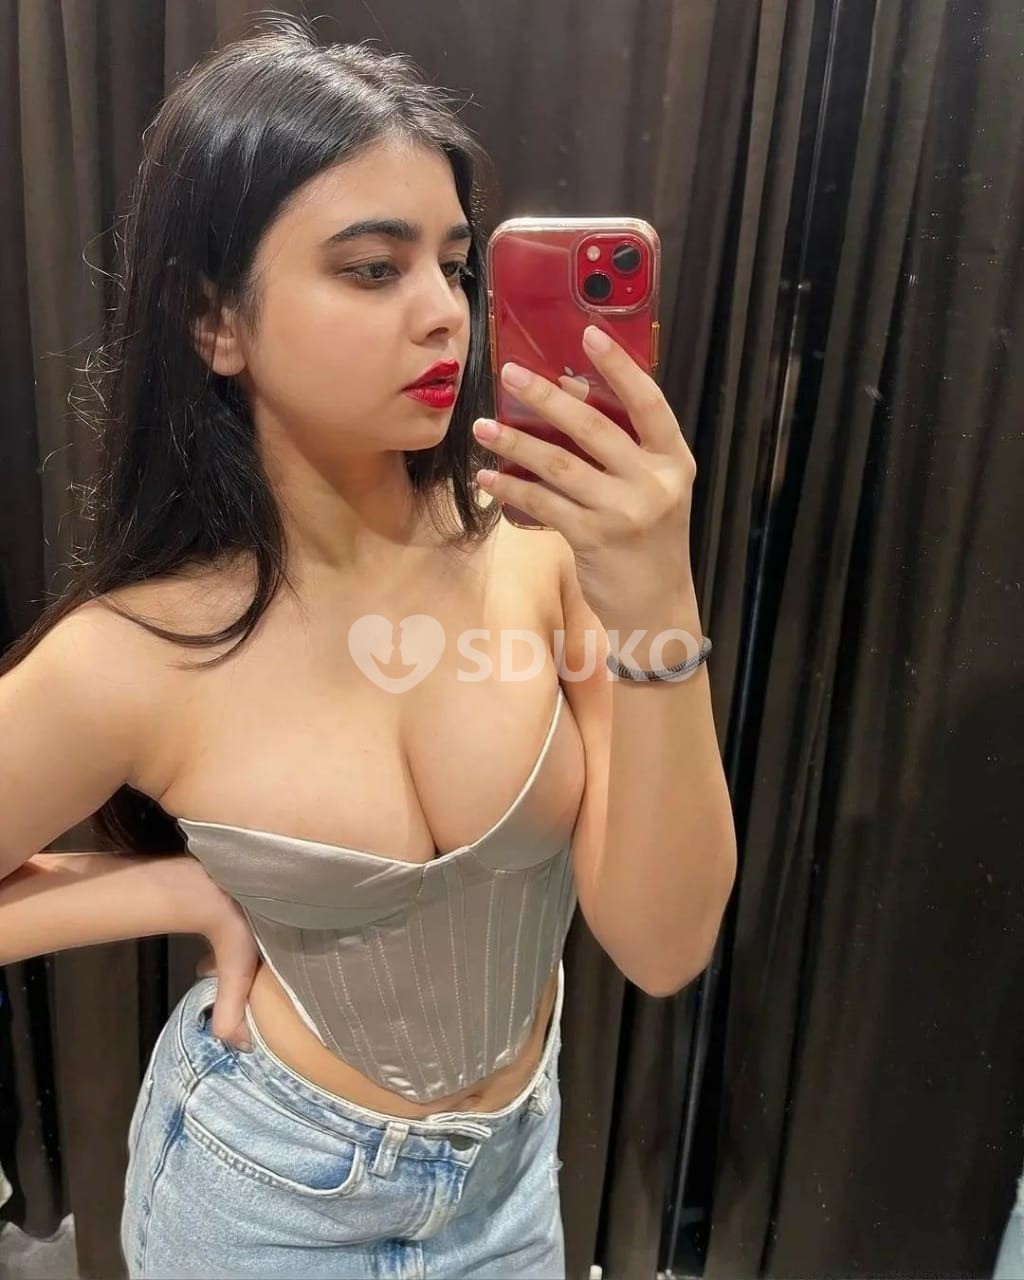 Jhunjhunu ❤️ 100 % SAFE AND SECURE TODAY LOW PRICE UNLIMITED ENJOY HOT COLLEGE GIRL HOUSEWIFE AUNTIES AVAILABLE ALL.